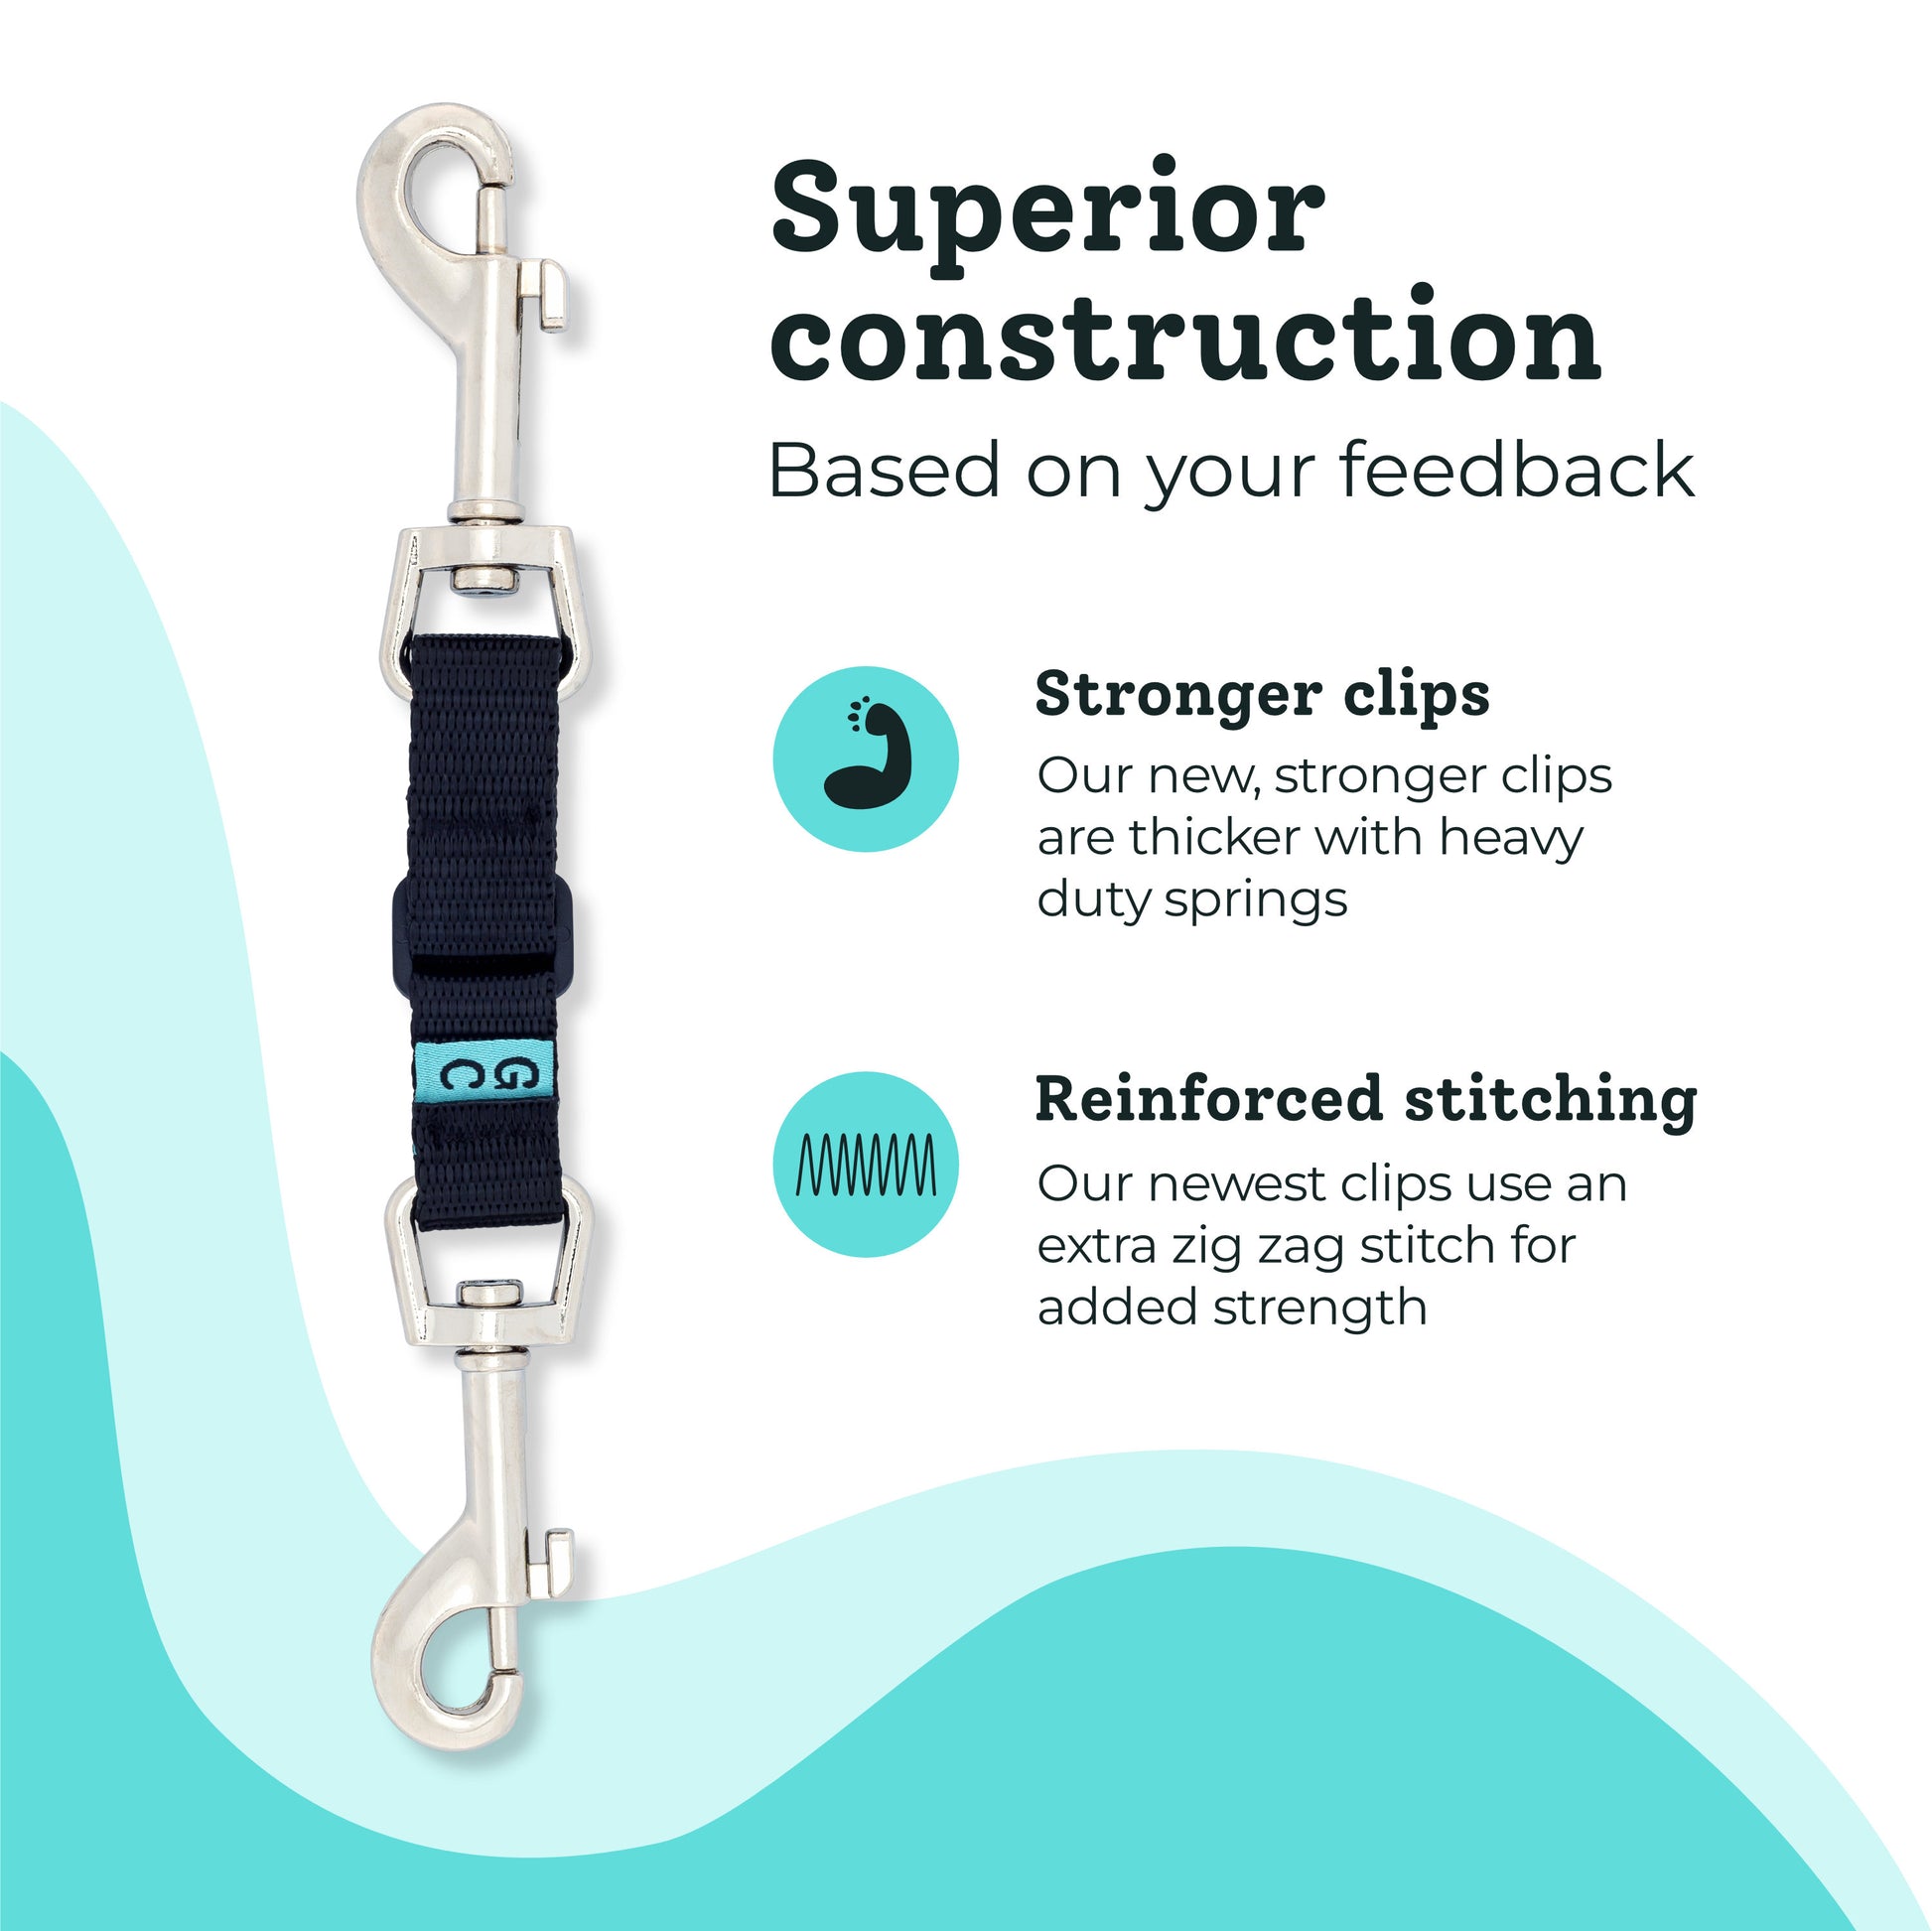 Superior construction, based on your feedback - Stronger clips: Our new, stronger clips are thicker with heavy duty springs - Reinforced stitching: Our newest clips use an extra zig zag stitch for added strength